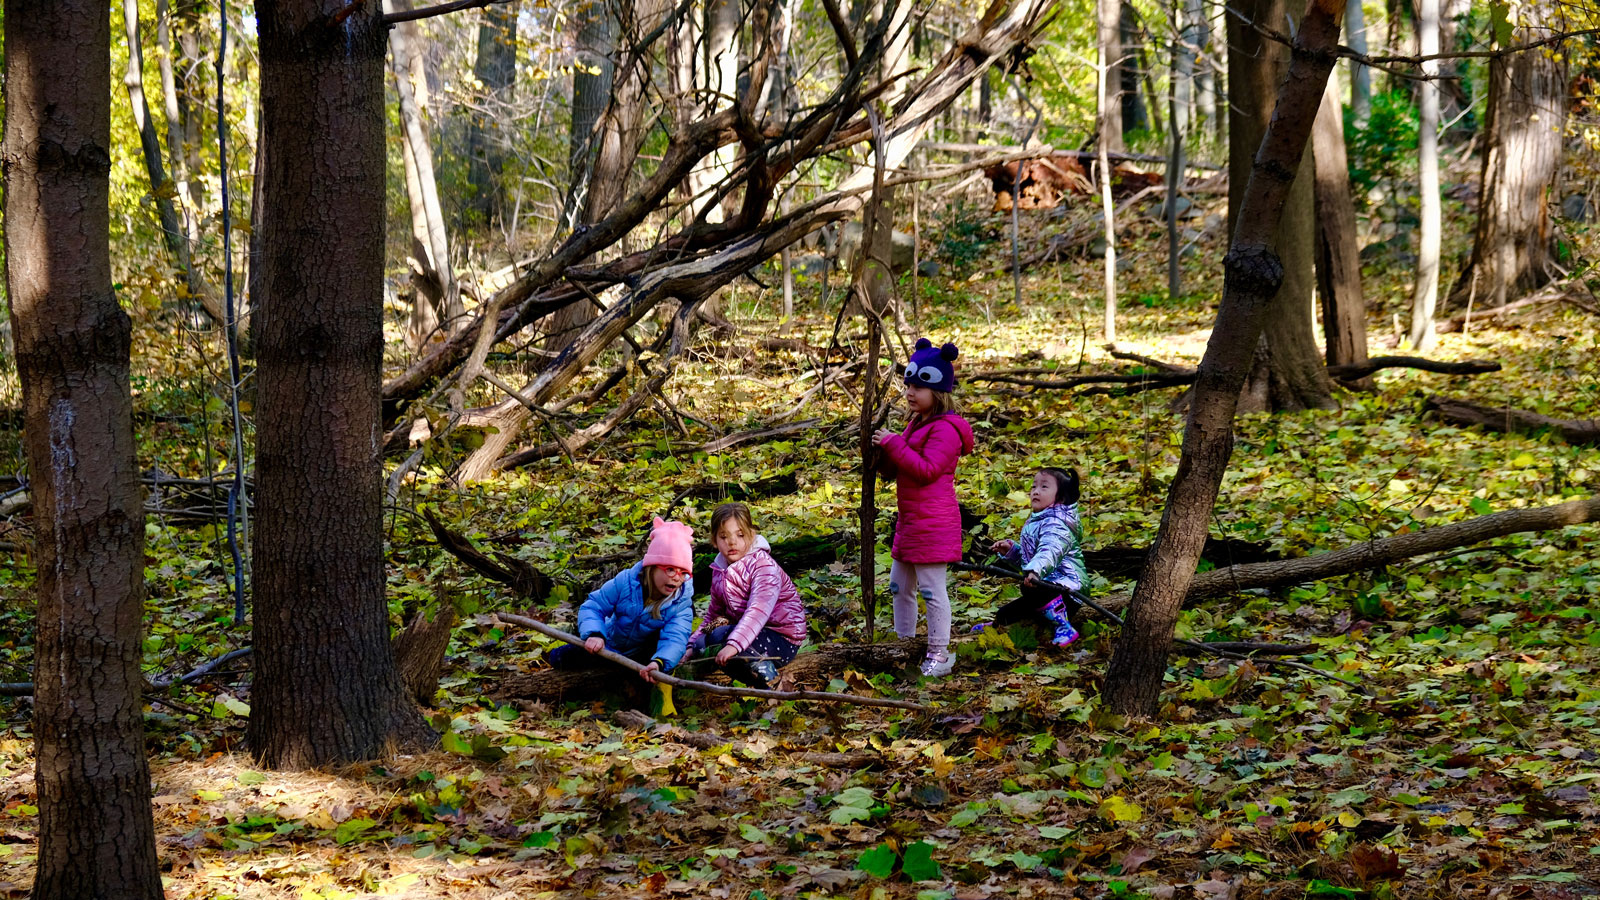 Children play with fallen branches in the woods.